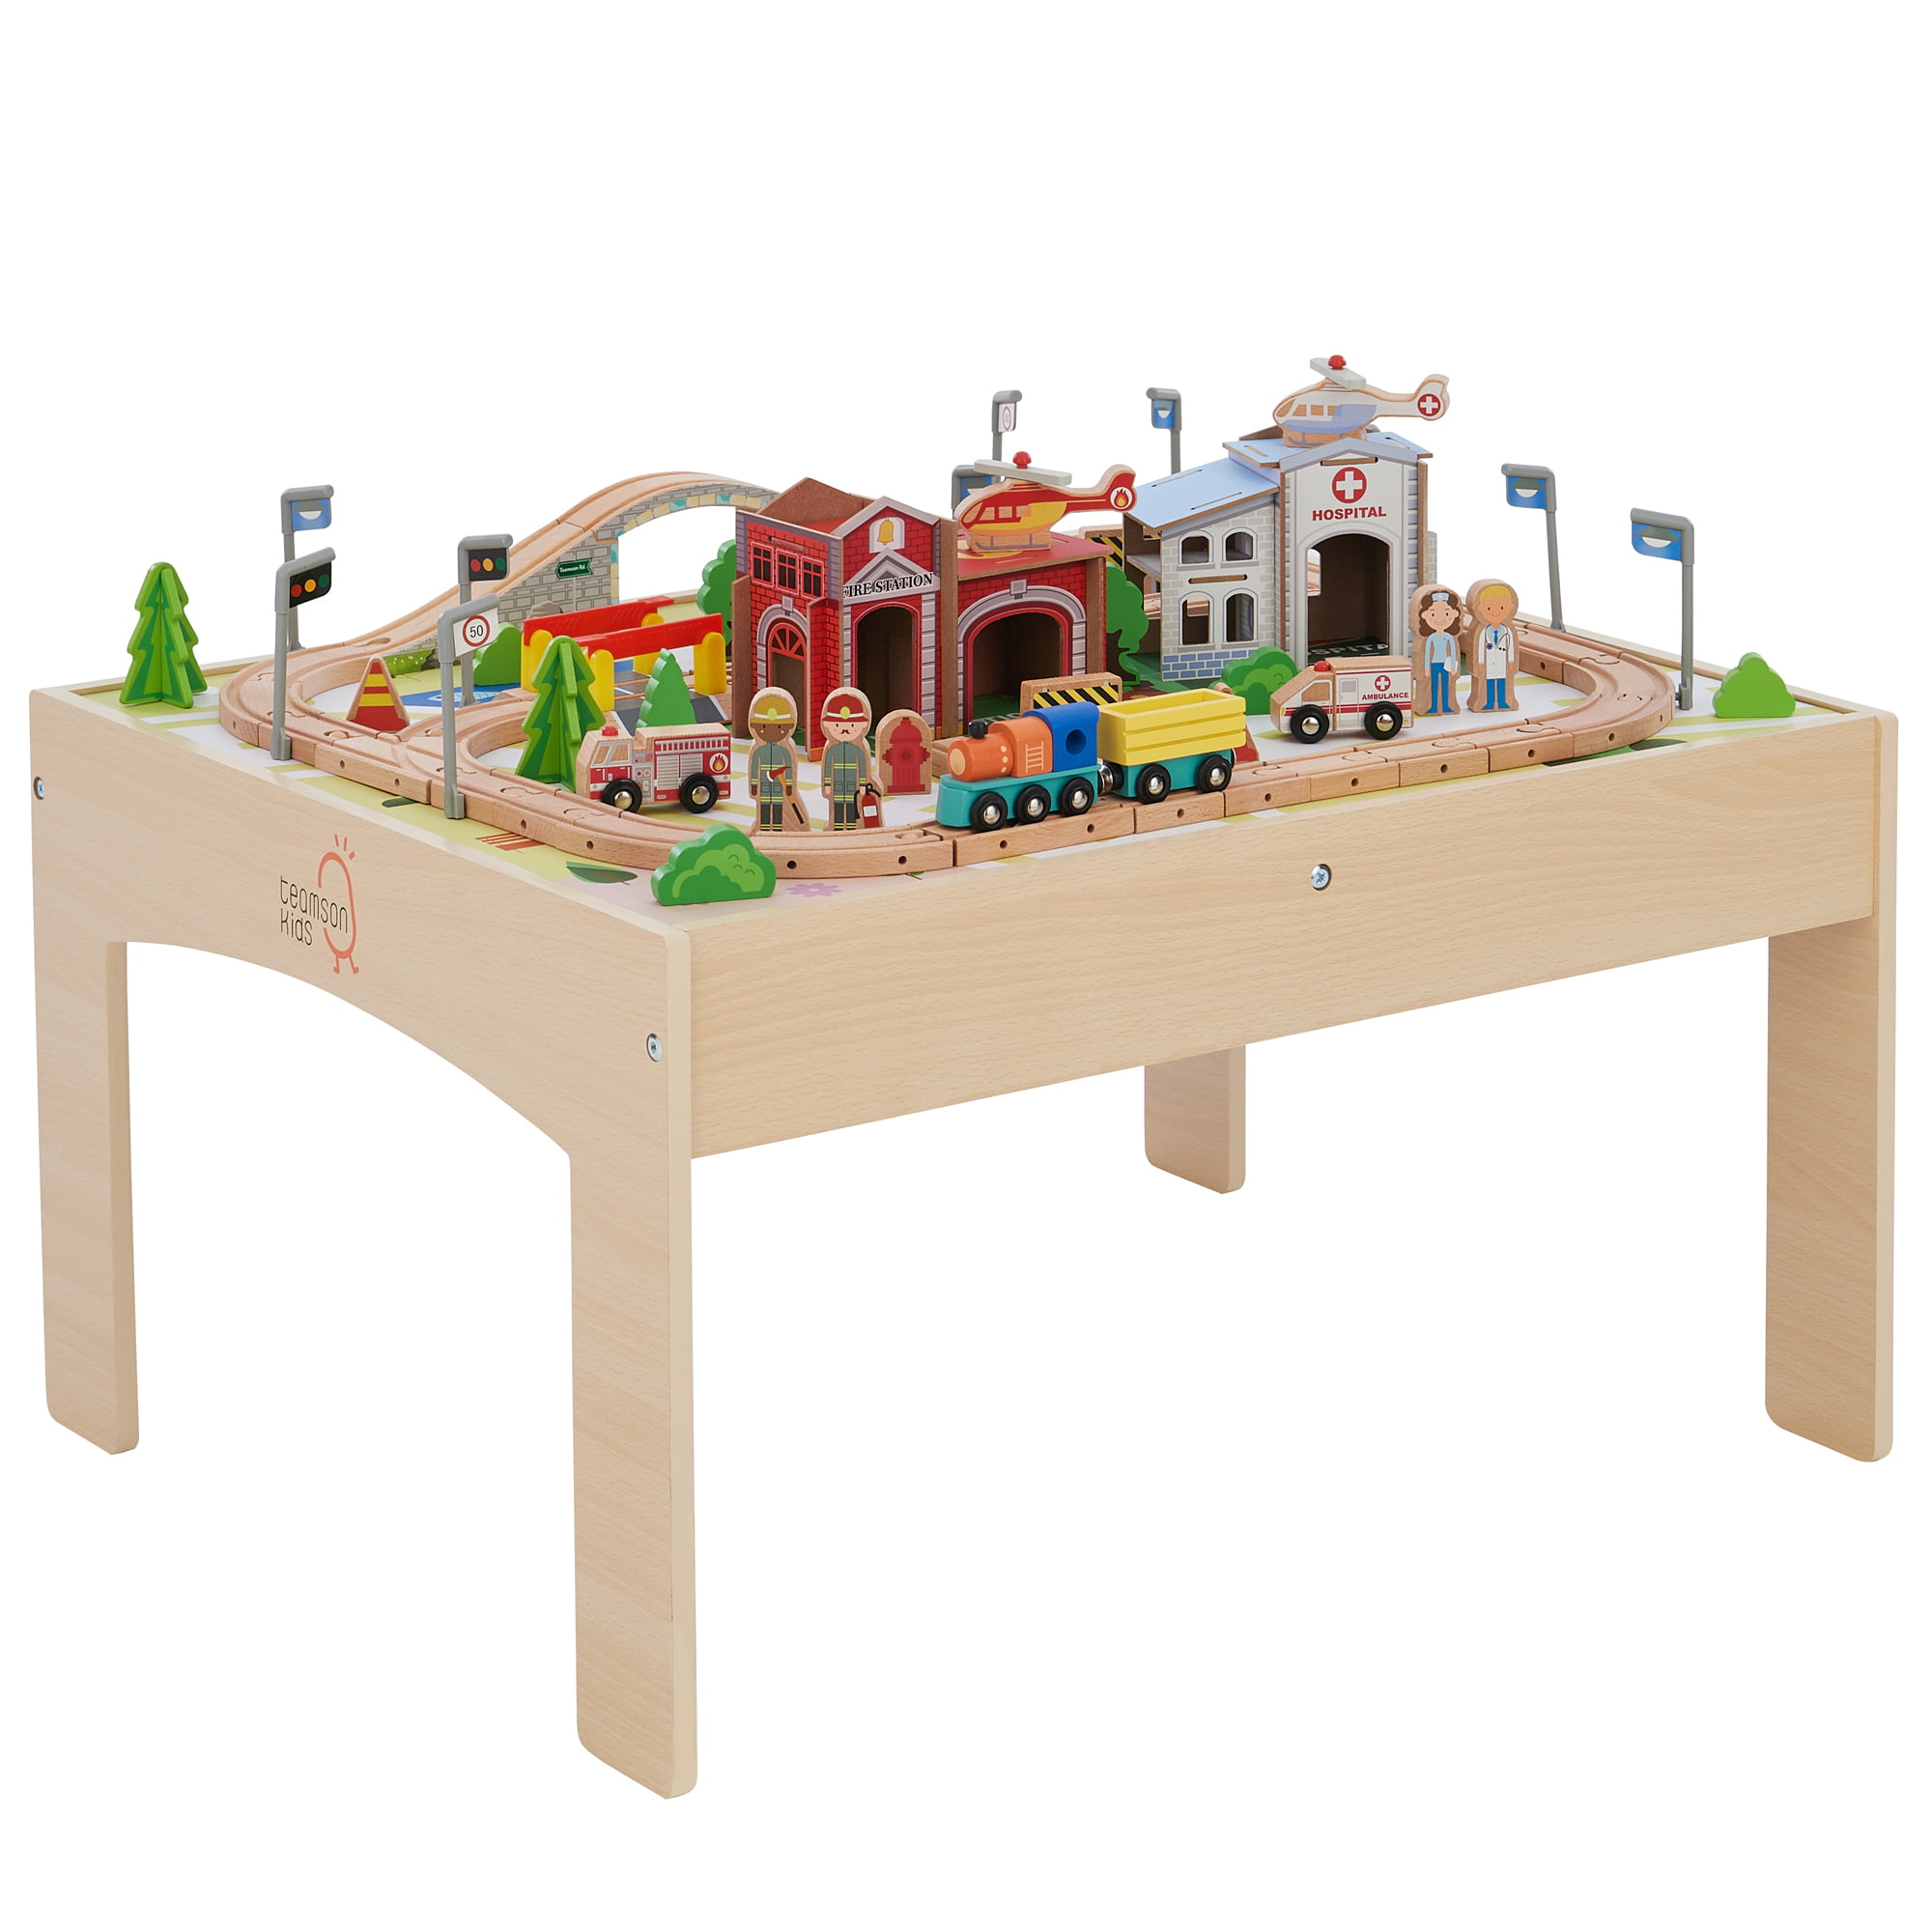 Teamson Kids - Preschool Play Lab Toys Country 85 pcs Train and Table set - Wood